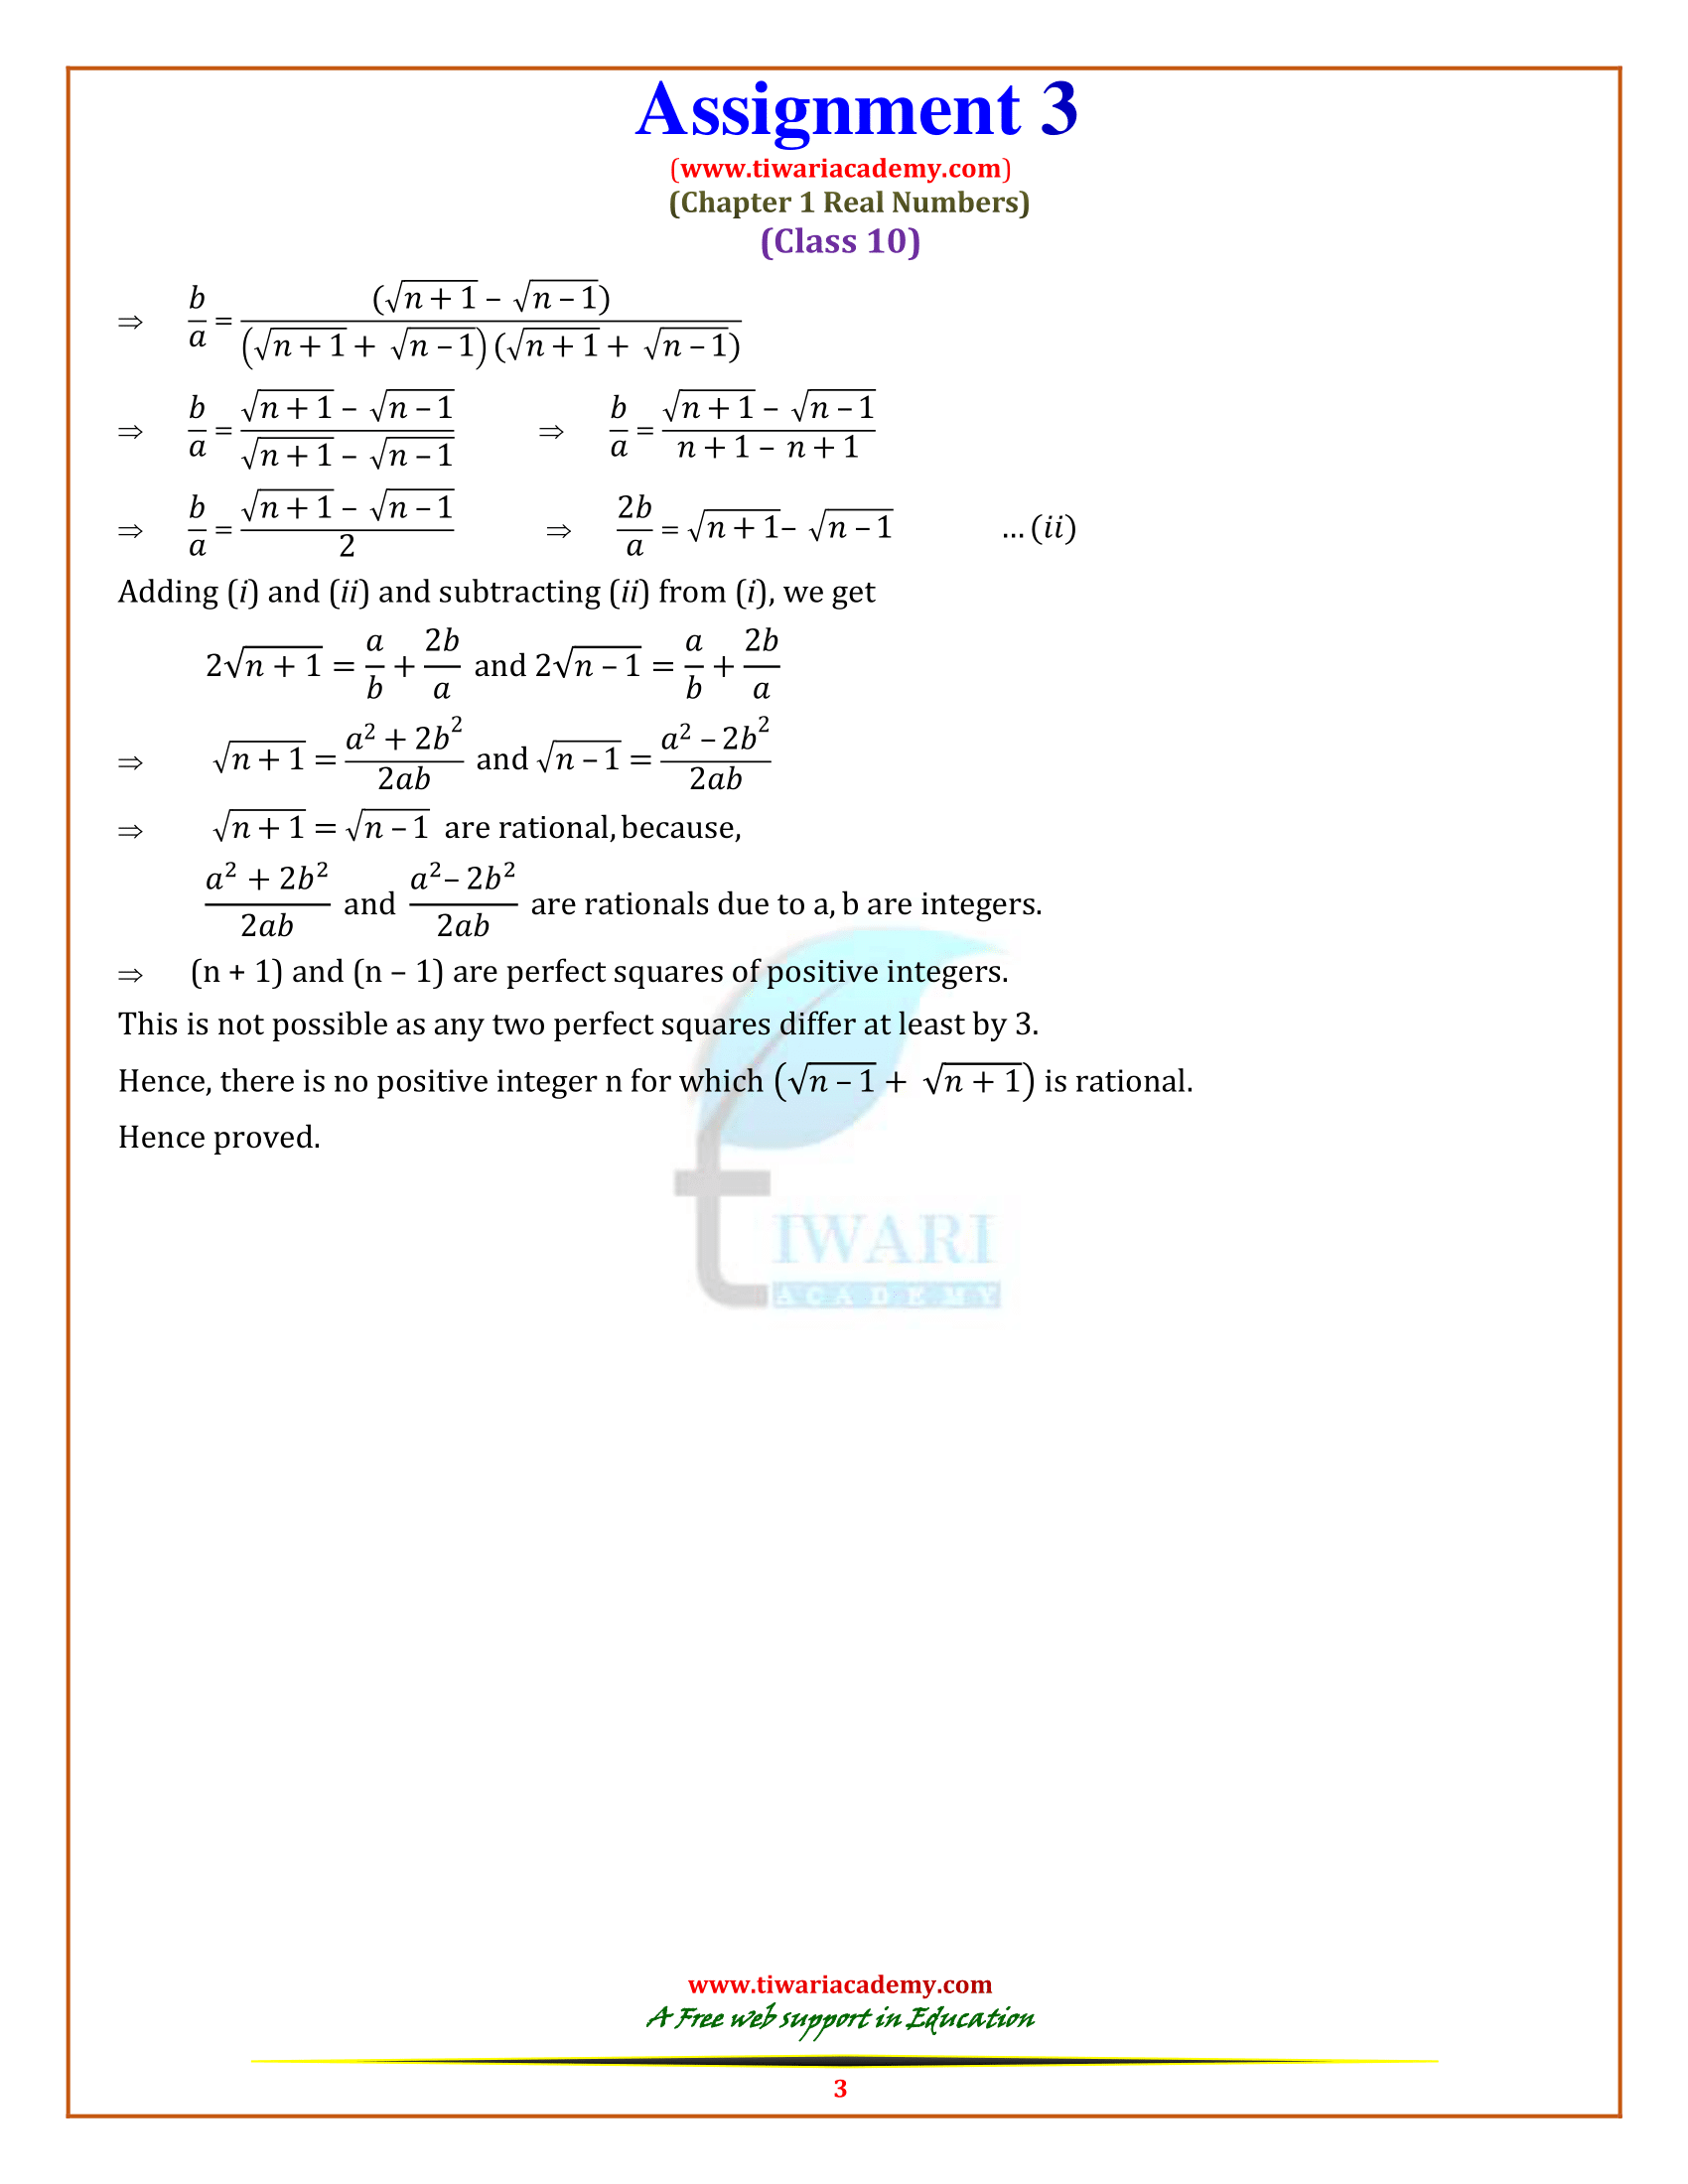 Class 10 Maths Assignments Real numbers